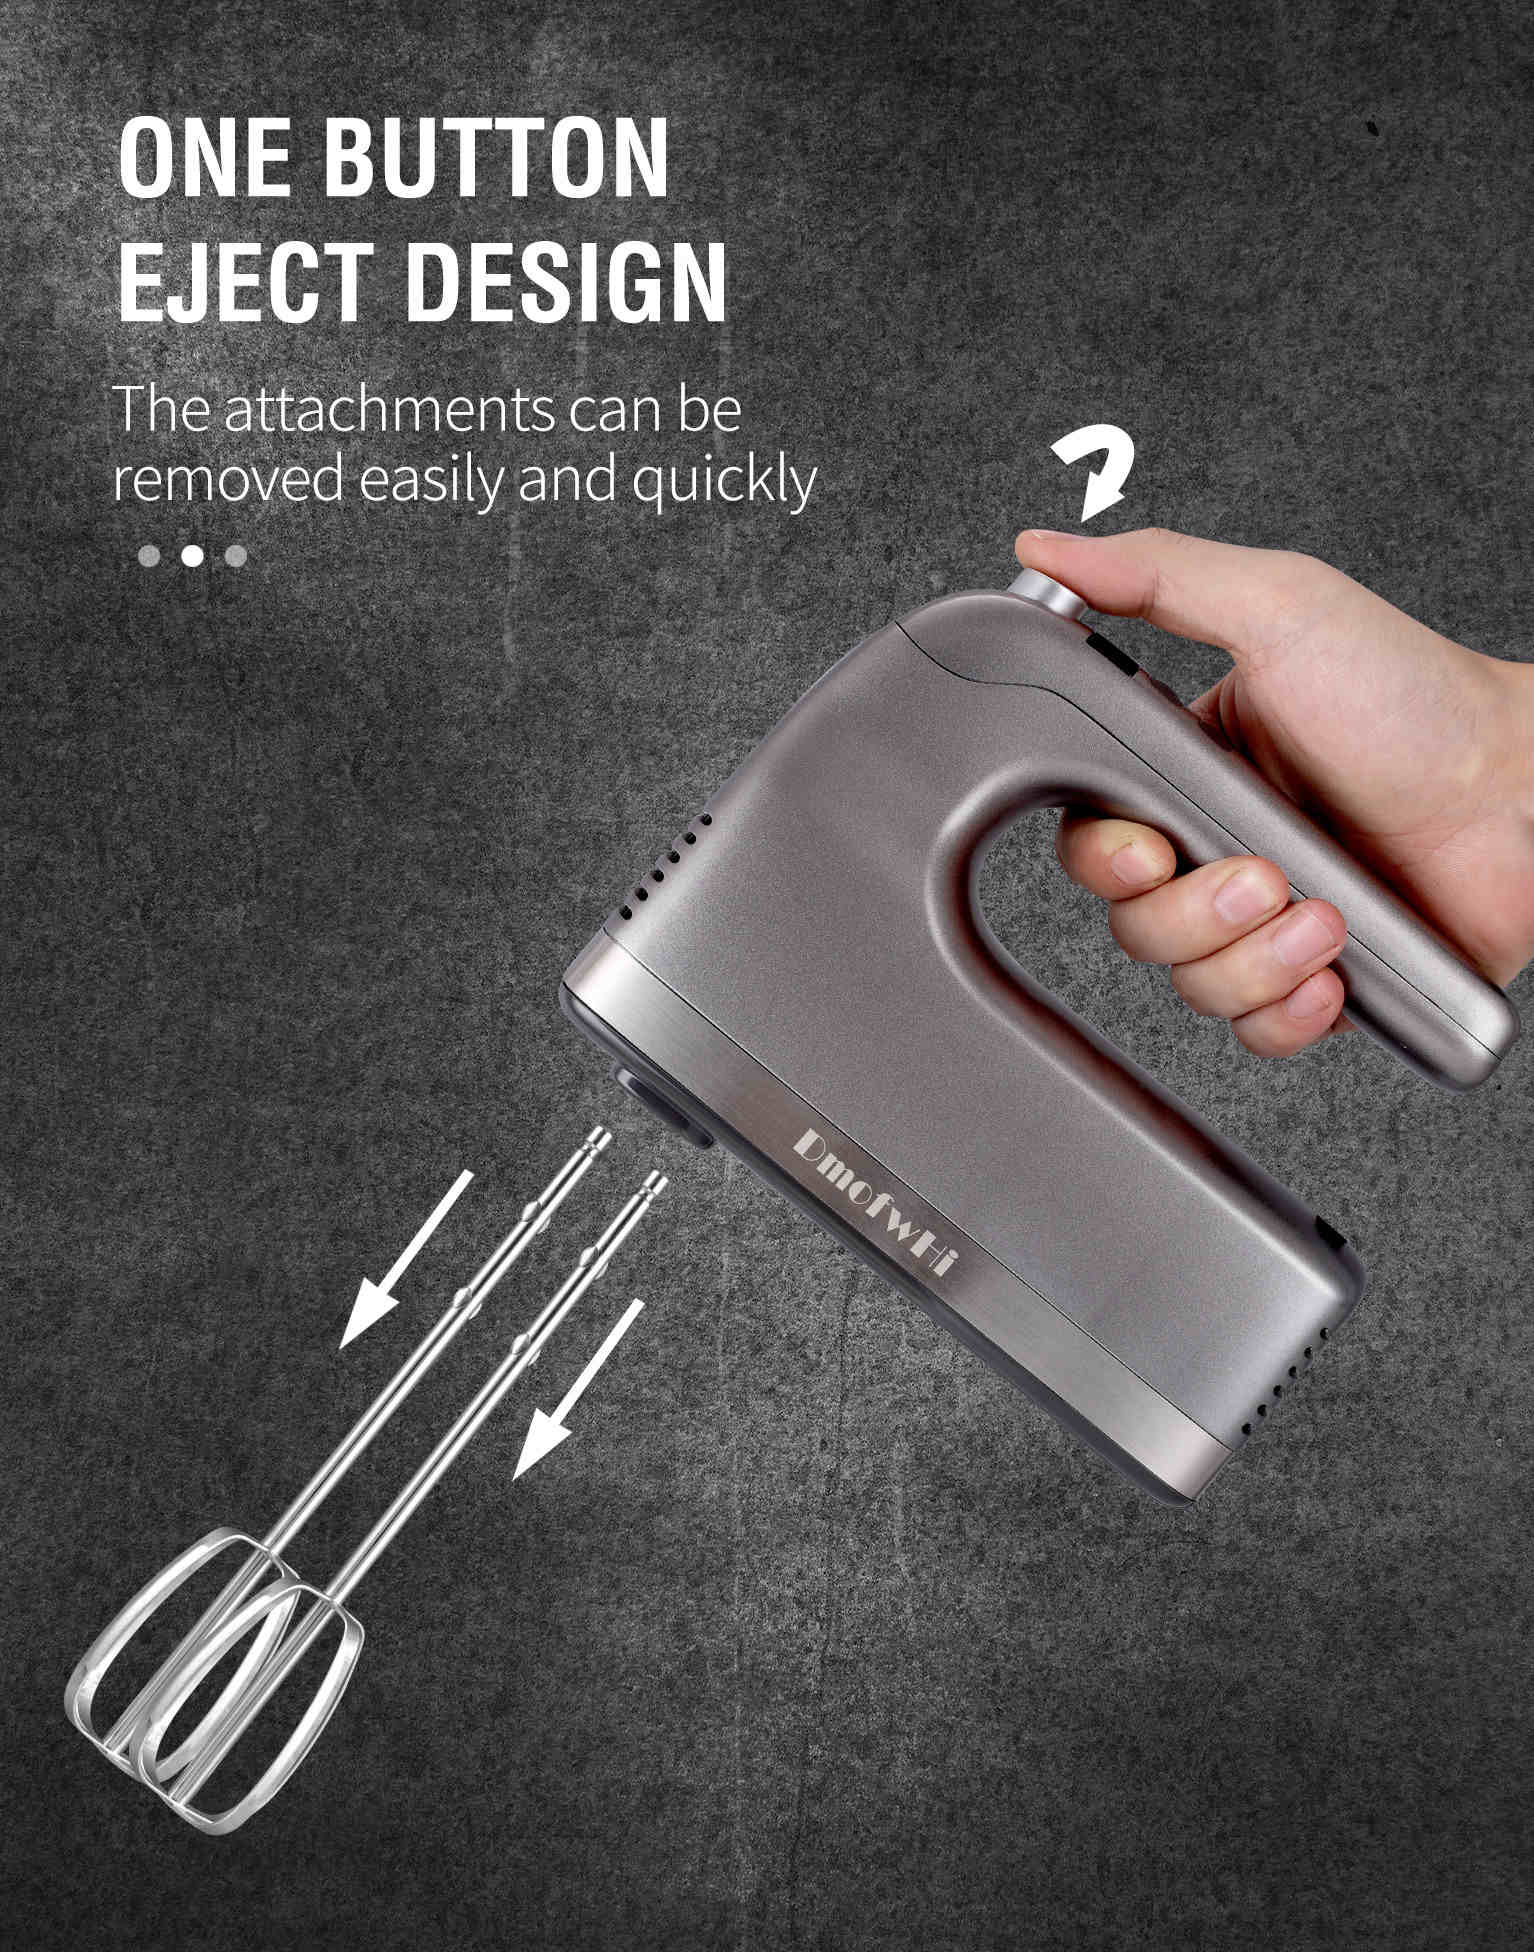  Yomelo 9-Speed Digital Hand Mixer Electric, 400W Powerful DC  Motor, Baking Mixer Handheld with Snap-On Storage Case, Touch Button, Turbo  Boost, Dough Hooks, Whisk (Ice Blue): Home & Kitchen